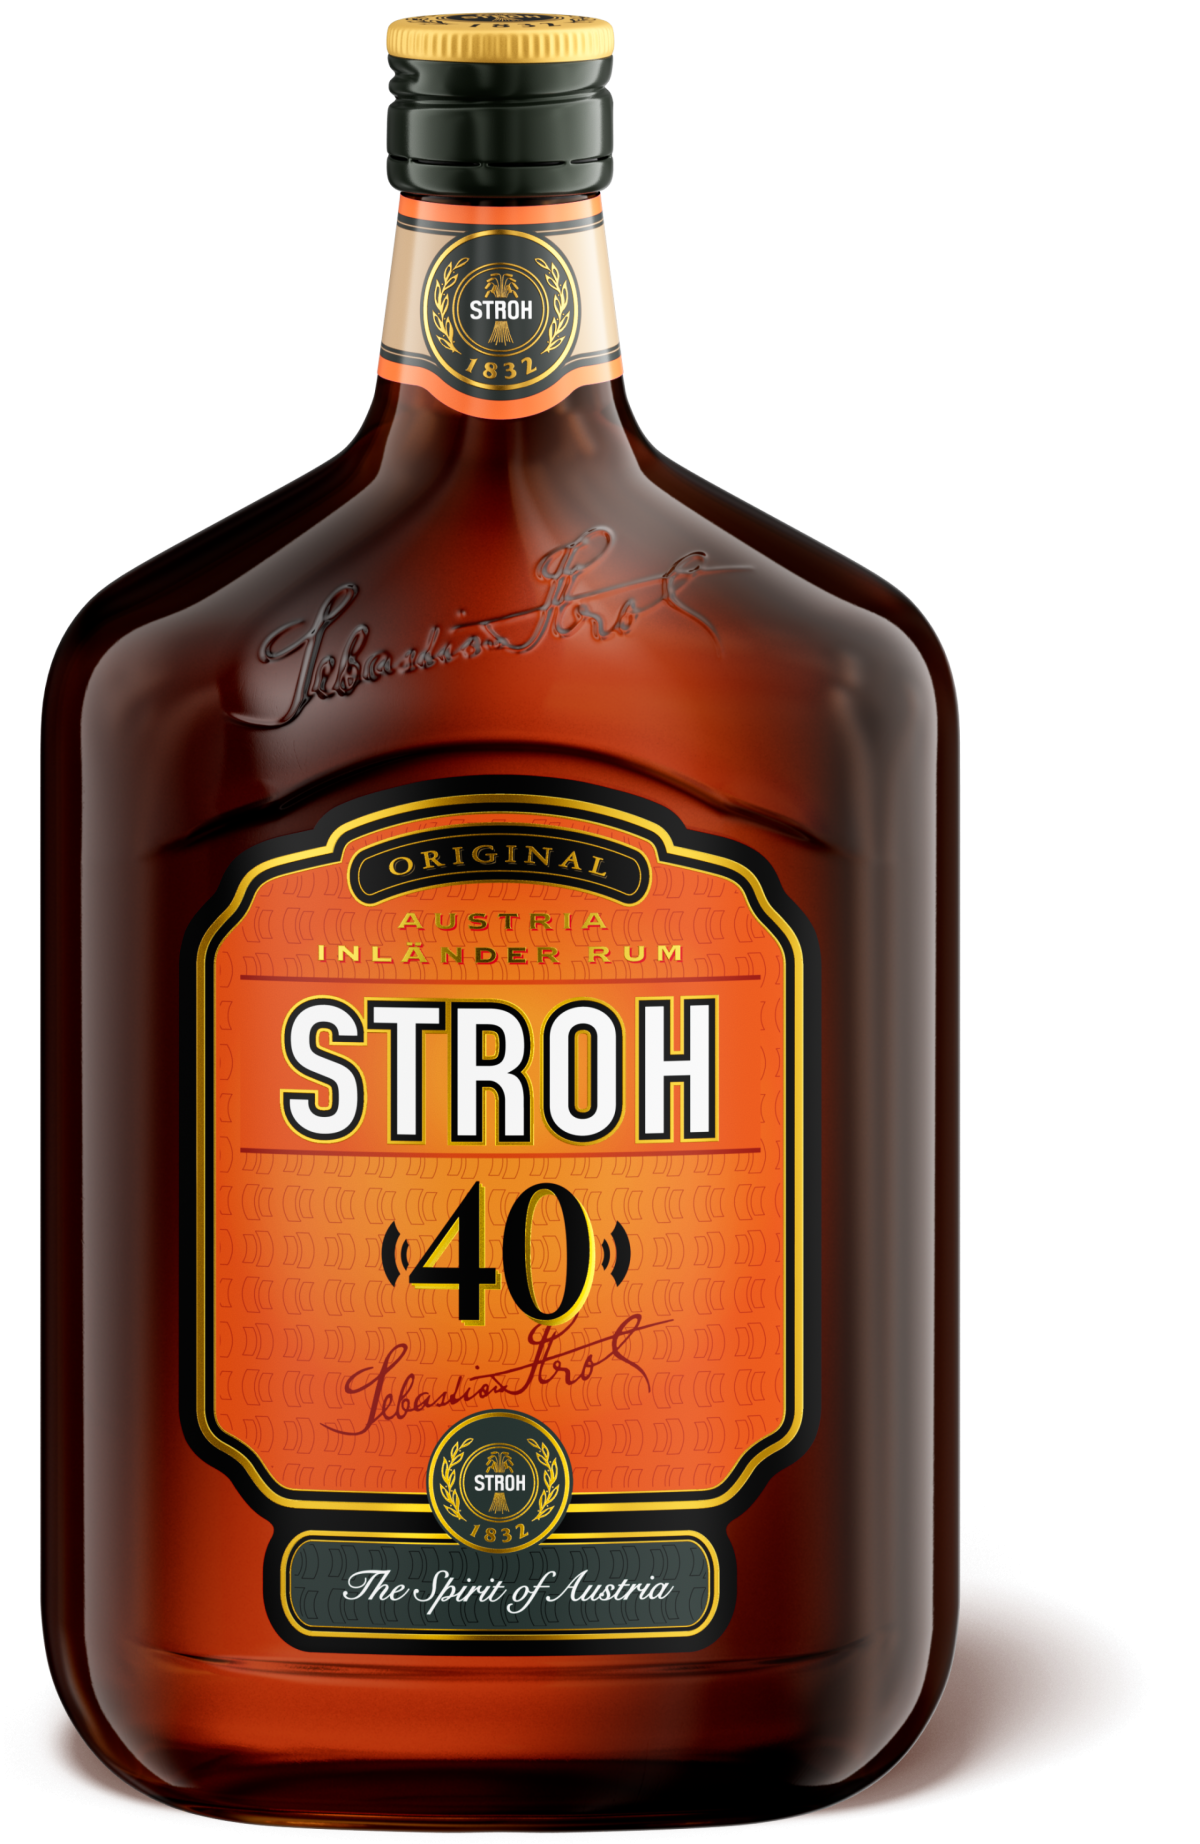 STROH Recipes: STROH Summer Cocktail – Add a little STROH!